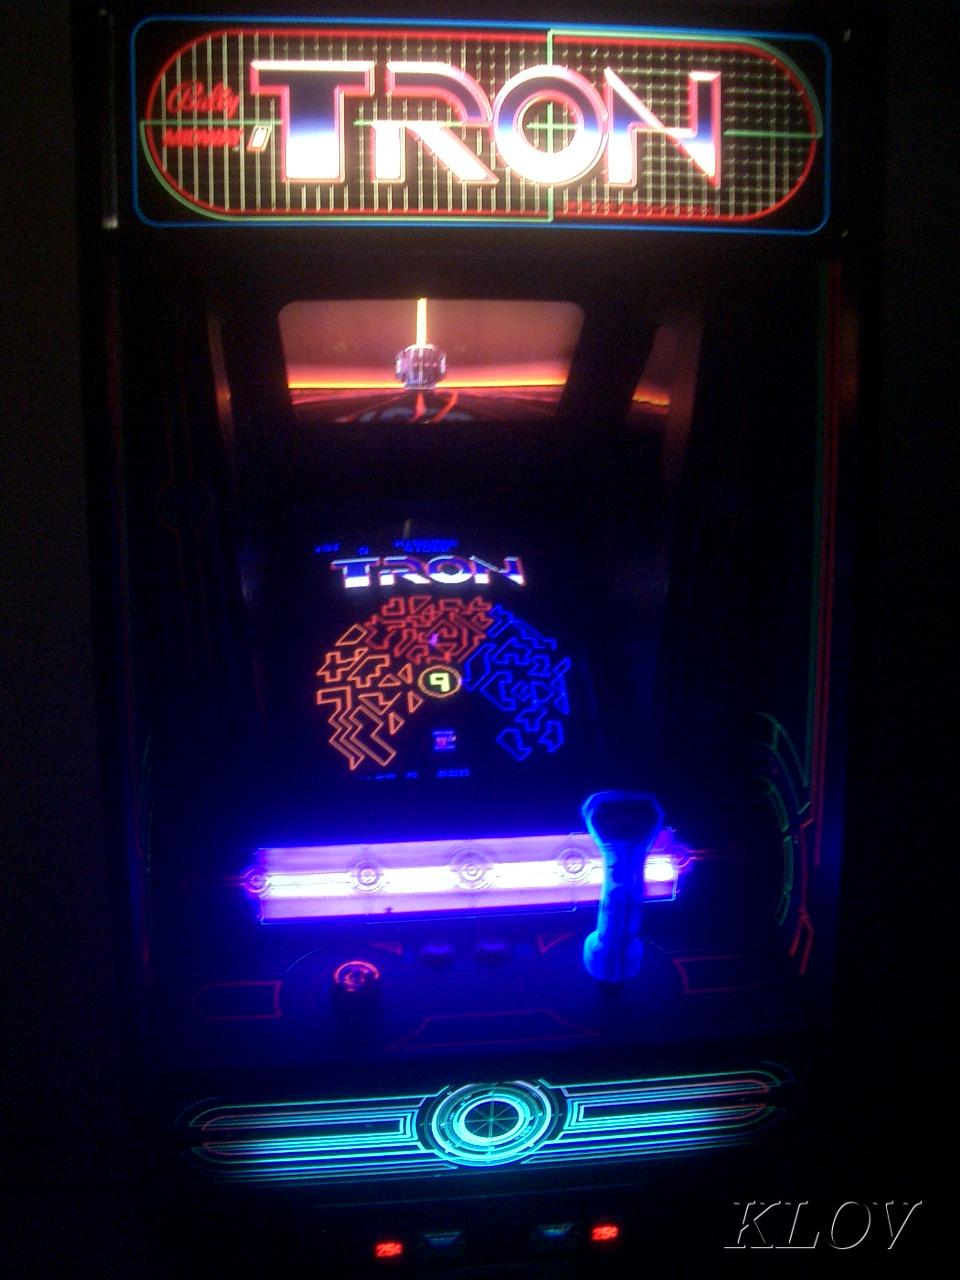 Tron Videogame By Bally Midway